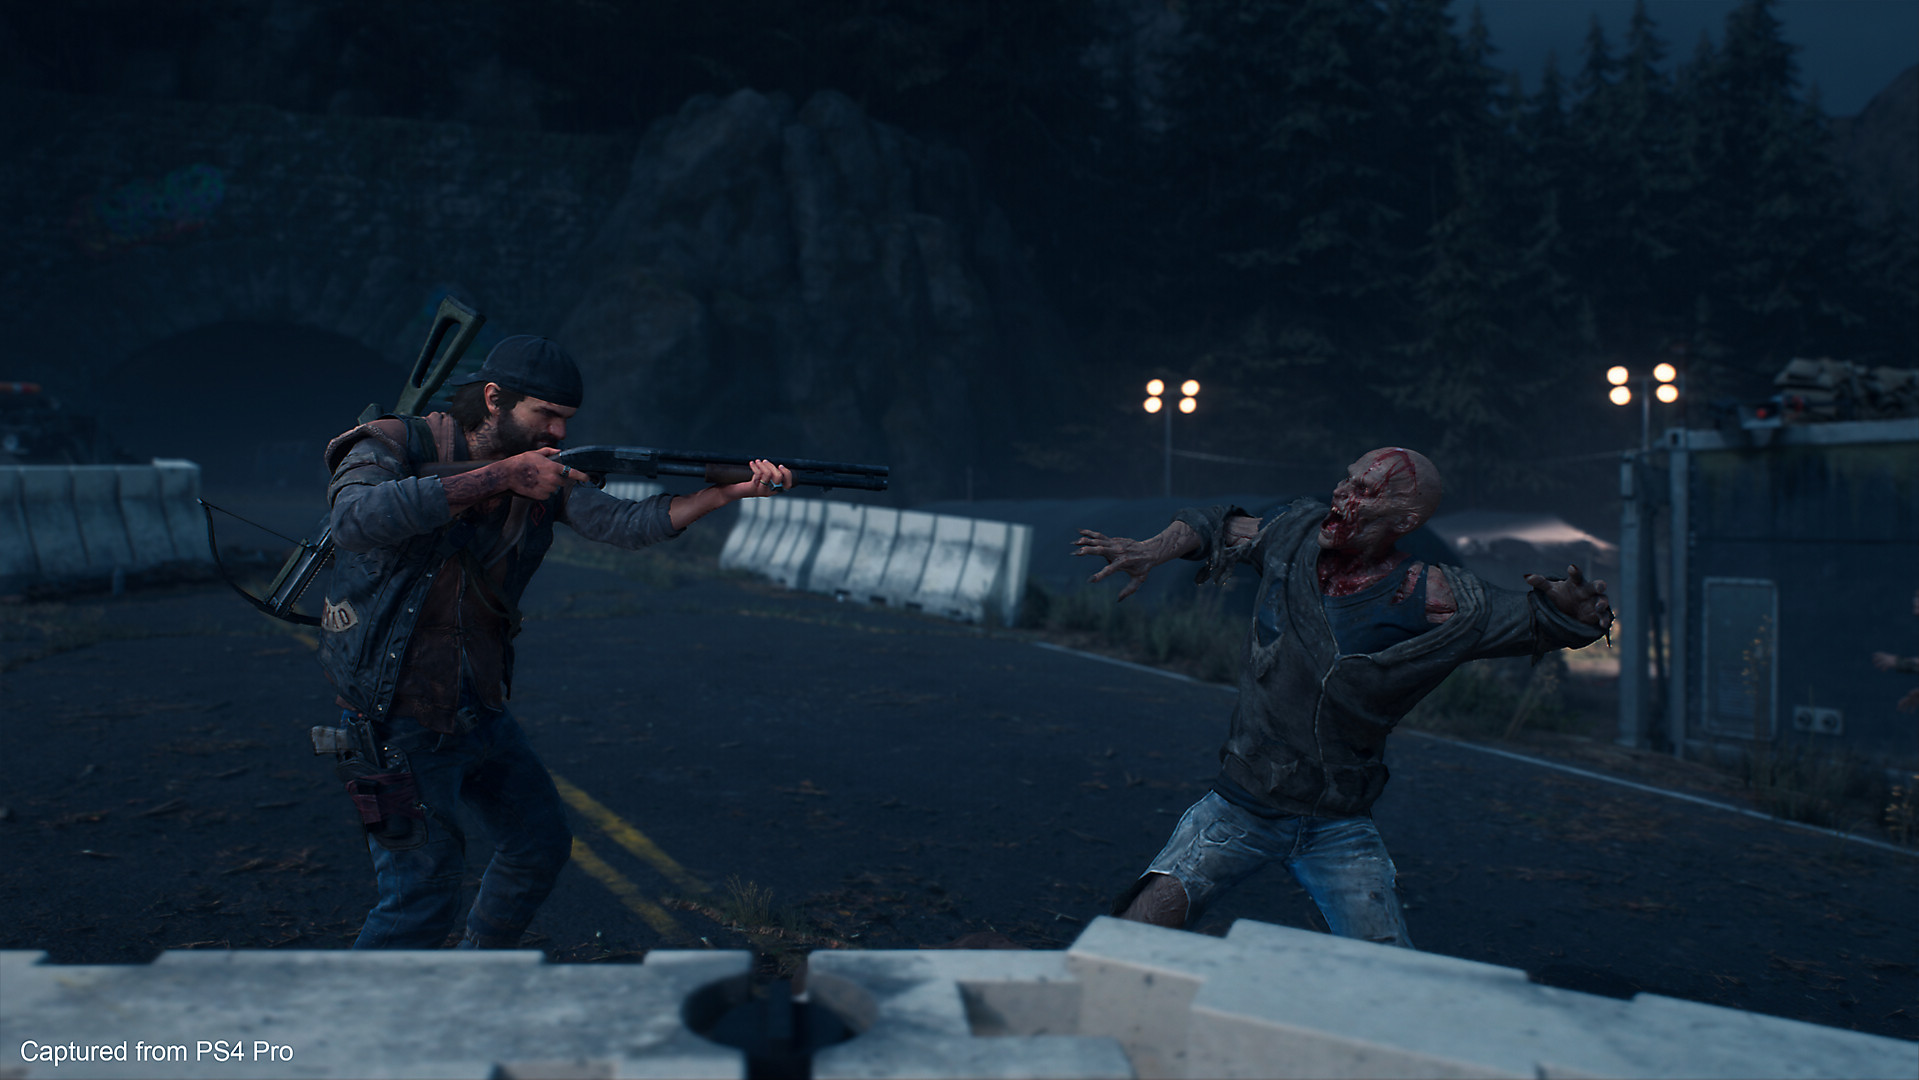 Days Gone Update Adds Character and Bike Skins, Challenges, and More